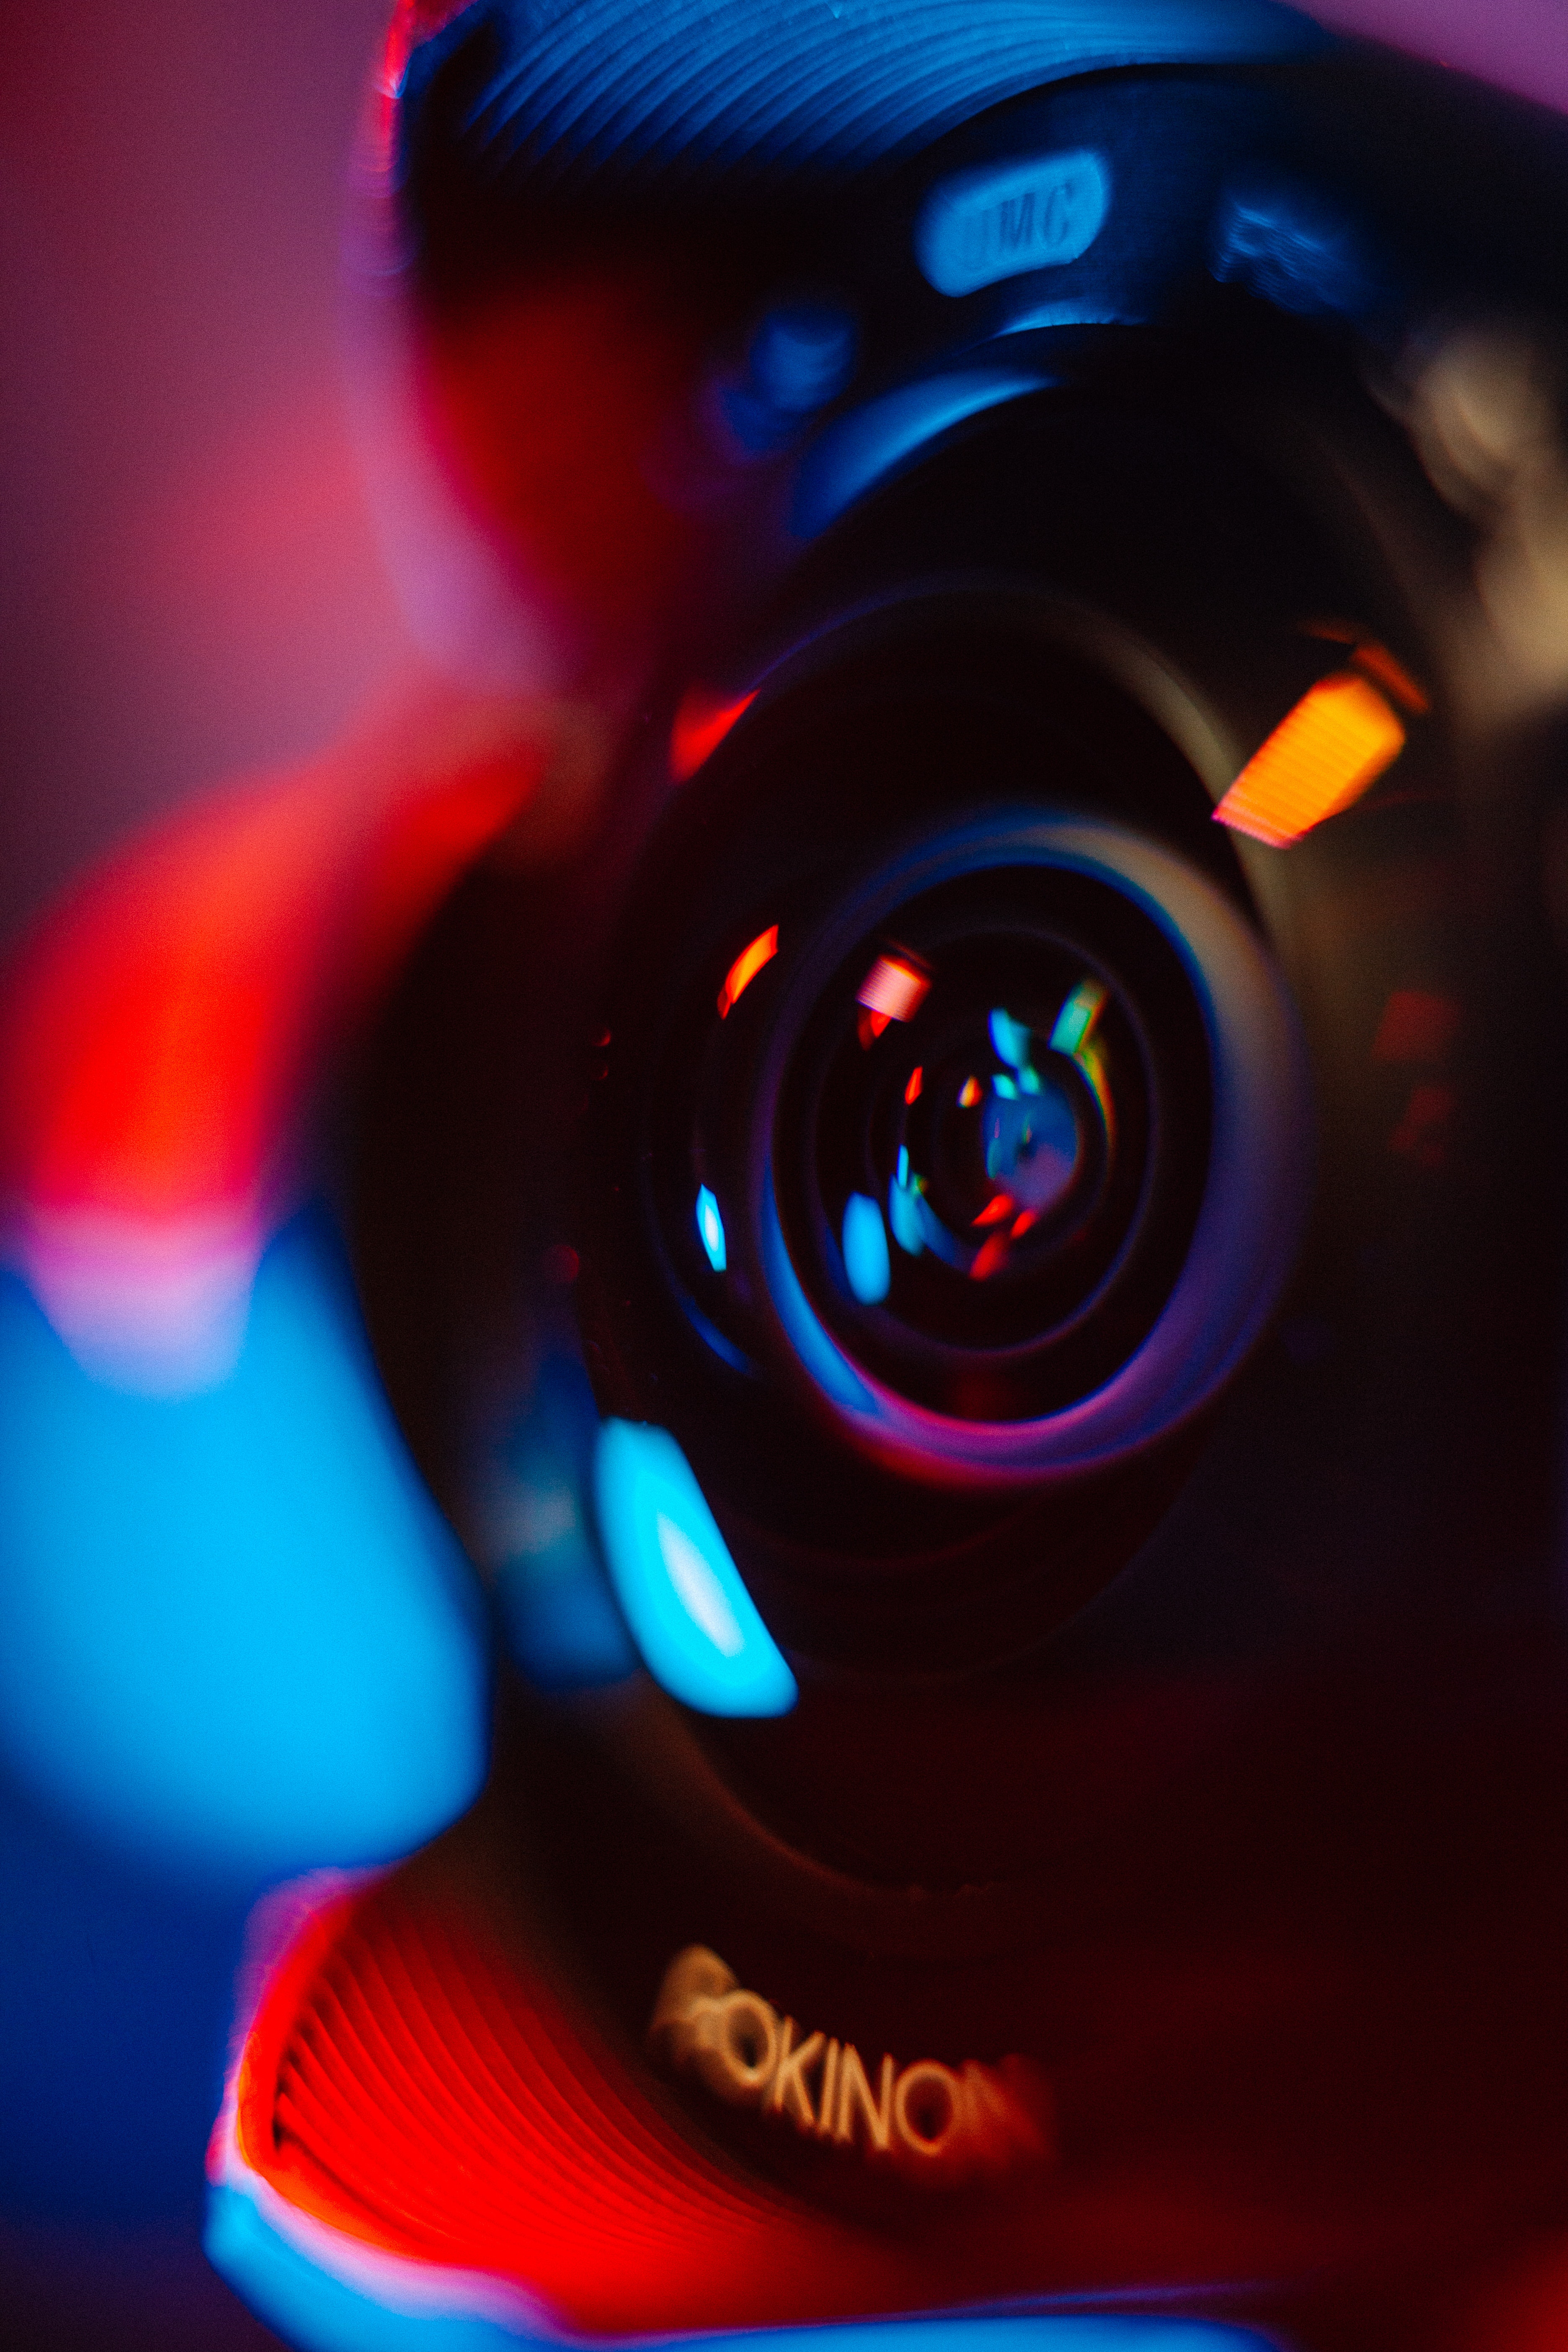 technology, technologies, lens, blur, glare, multicolored, motley, smooth, camera